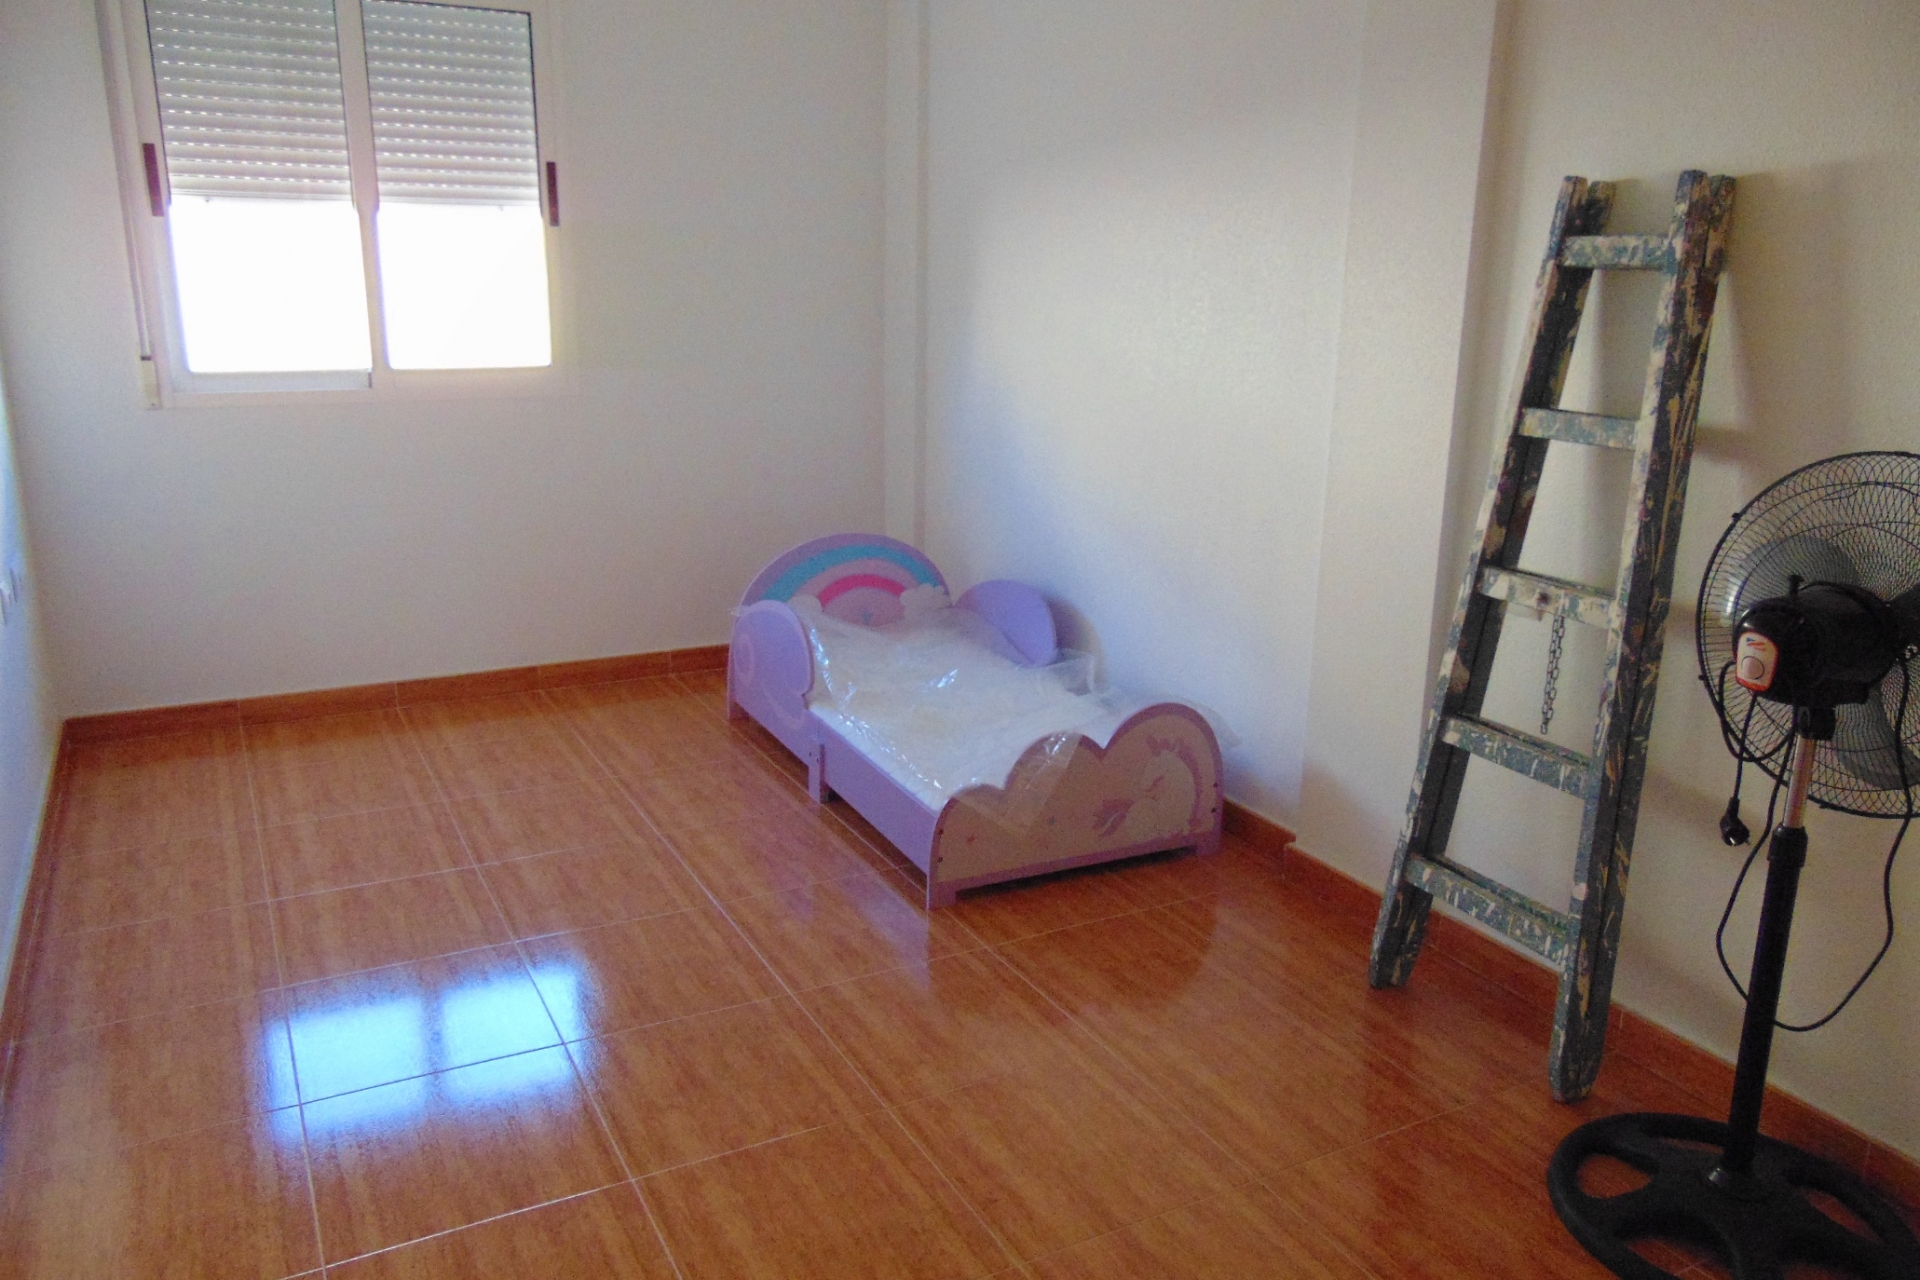 Archived - Townhouse for sale - Torre Pacheco - Torre Pacheco Town